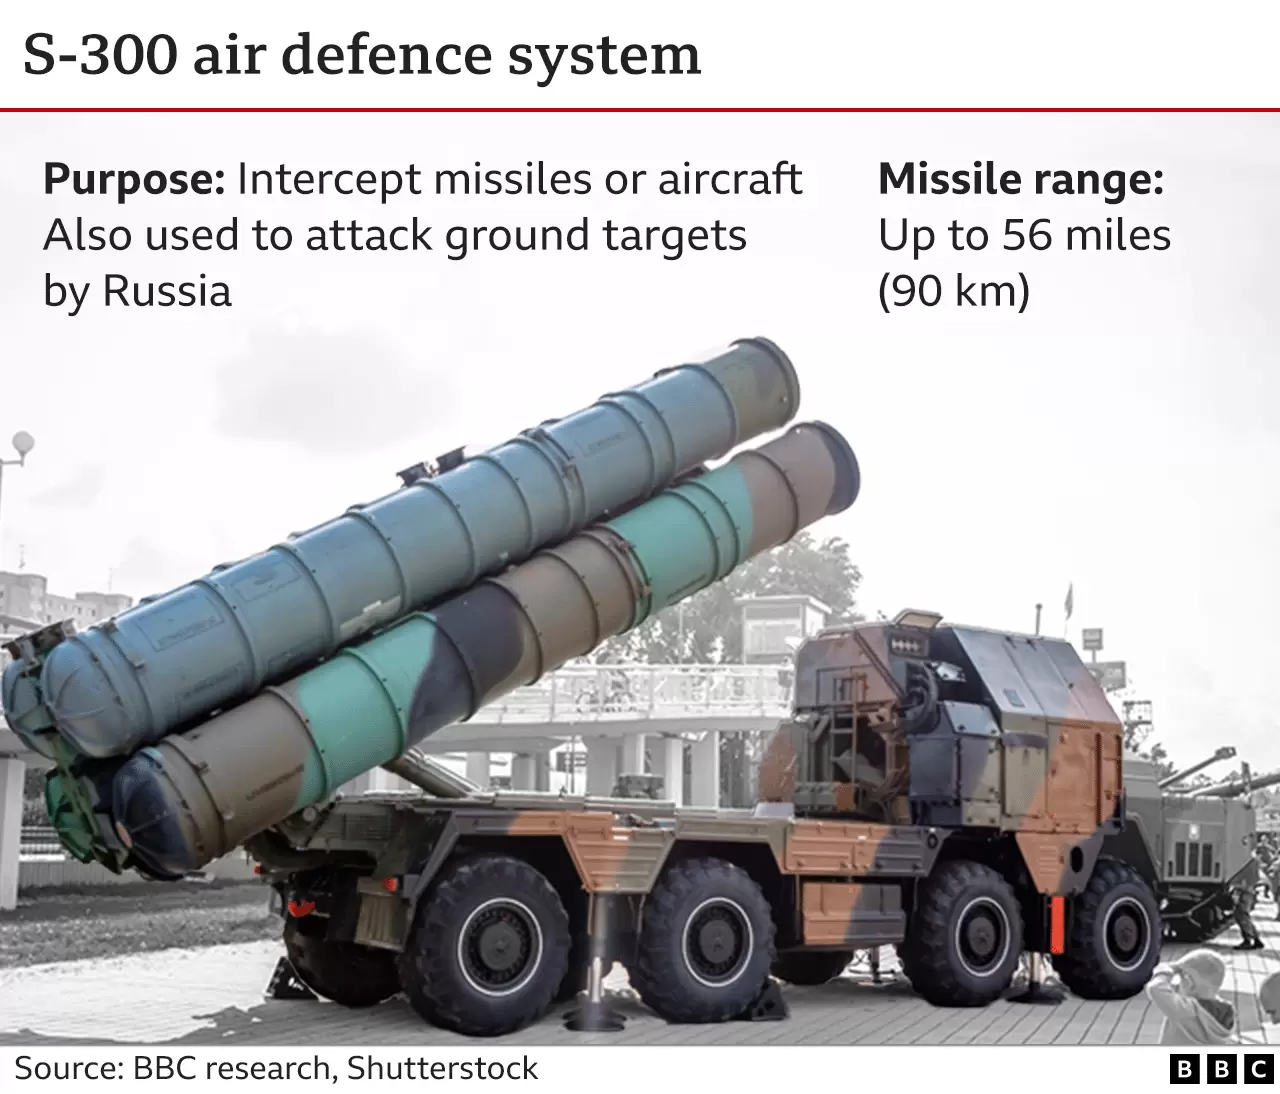 _127656588_s-300_air_defence_system-2x-nc.png.webp